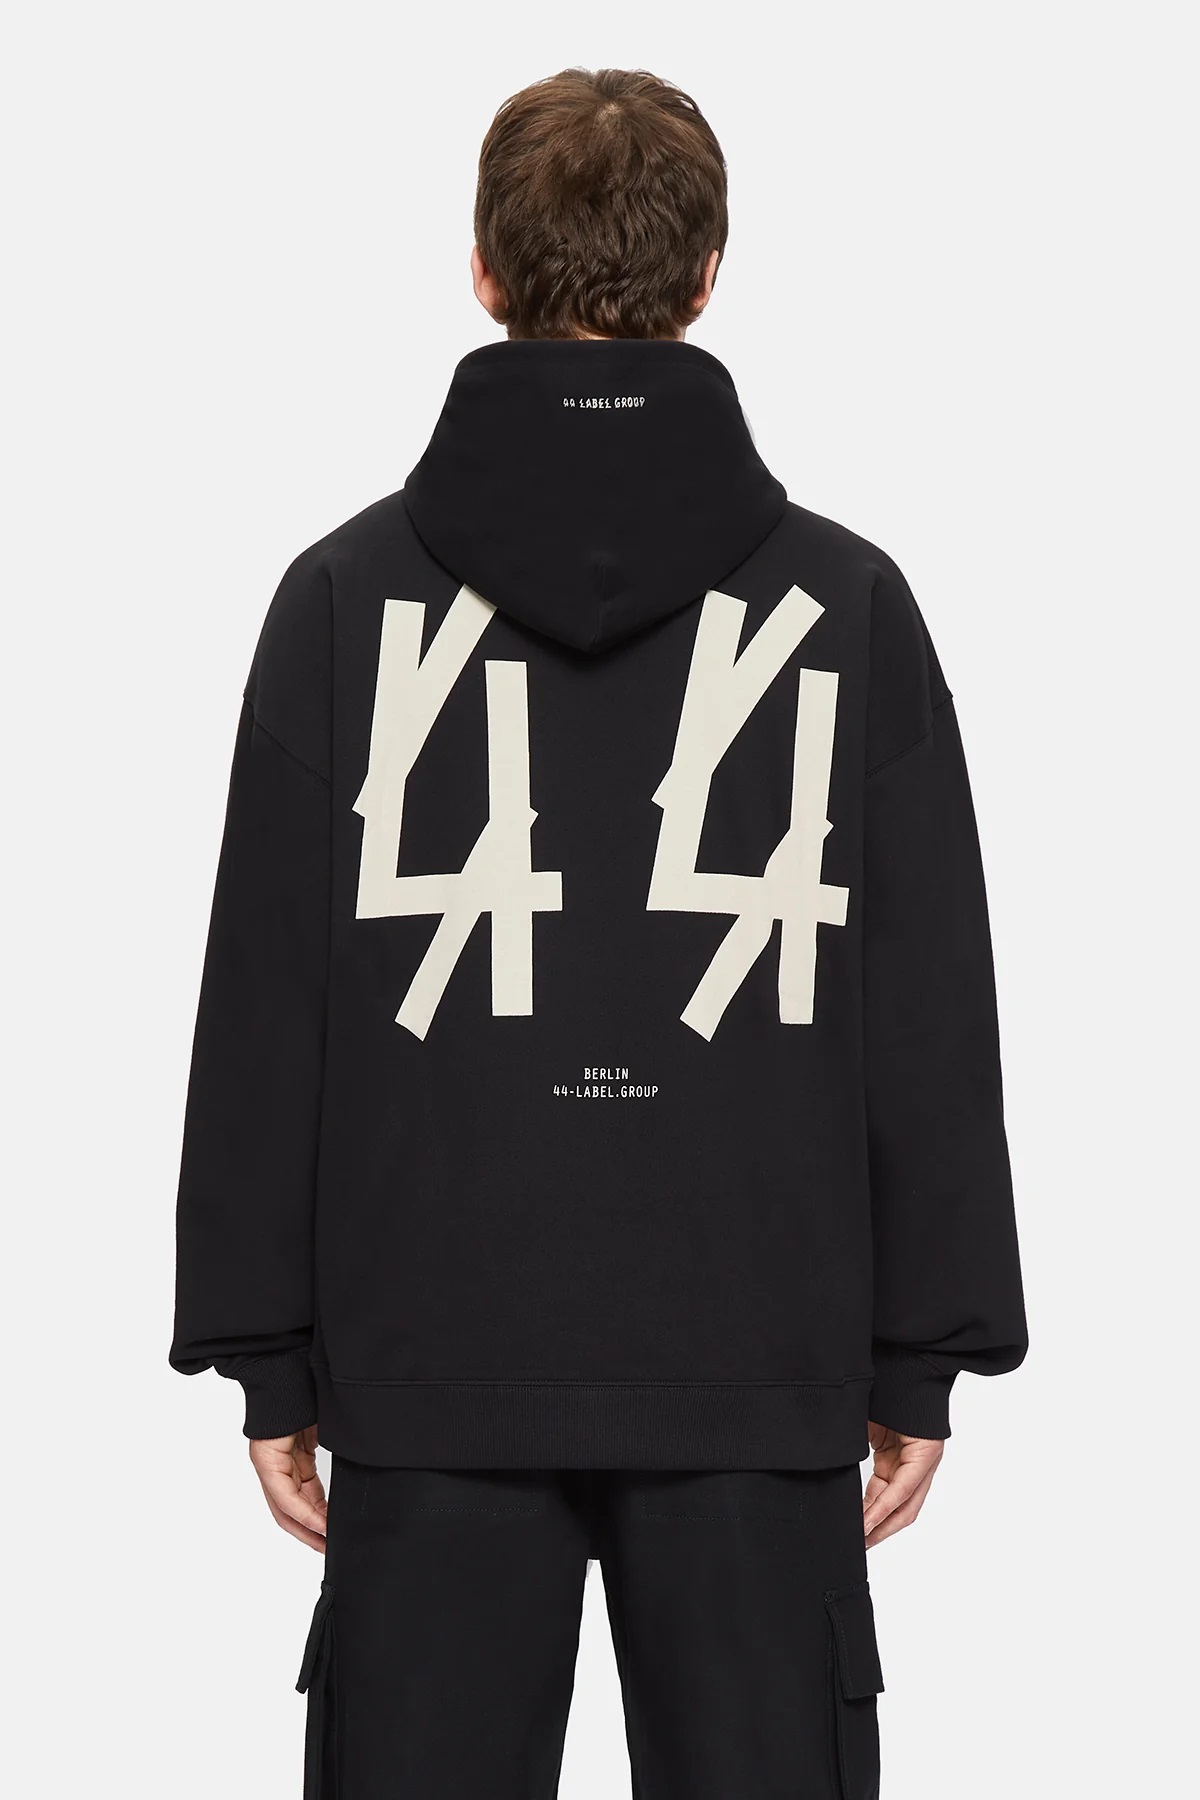 44 LABEL GROUP New Classic Hoodie in Black/Dirty White 2XL